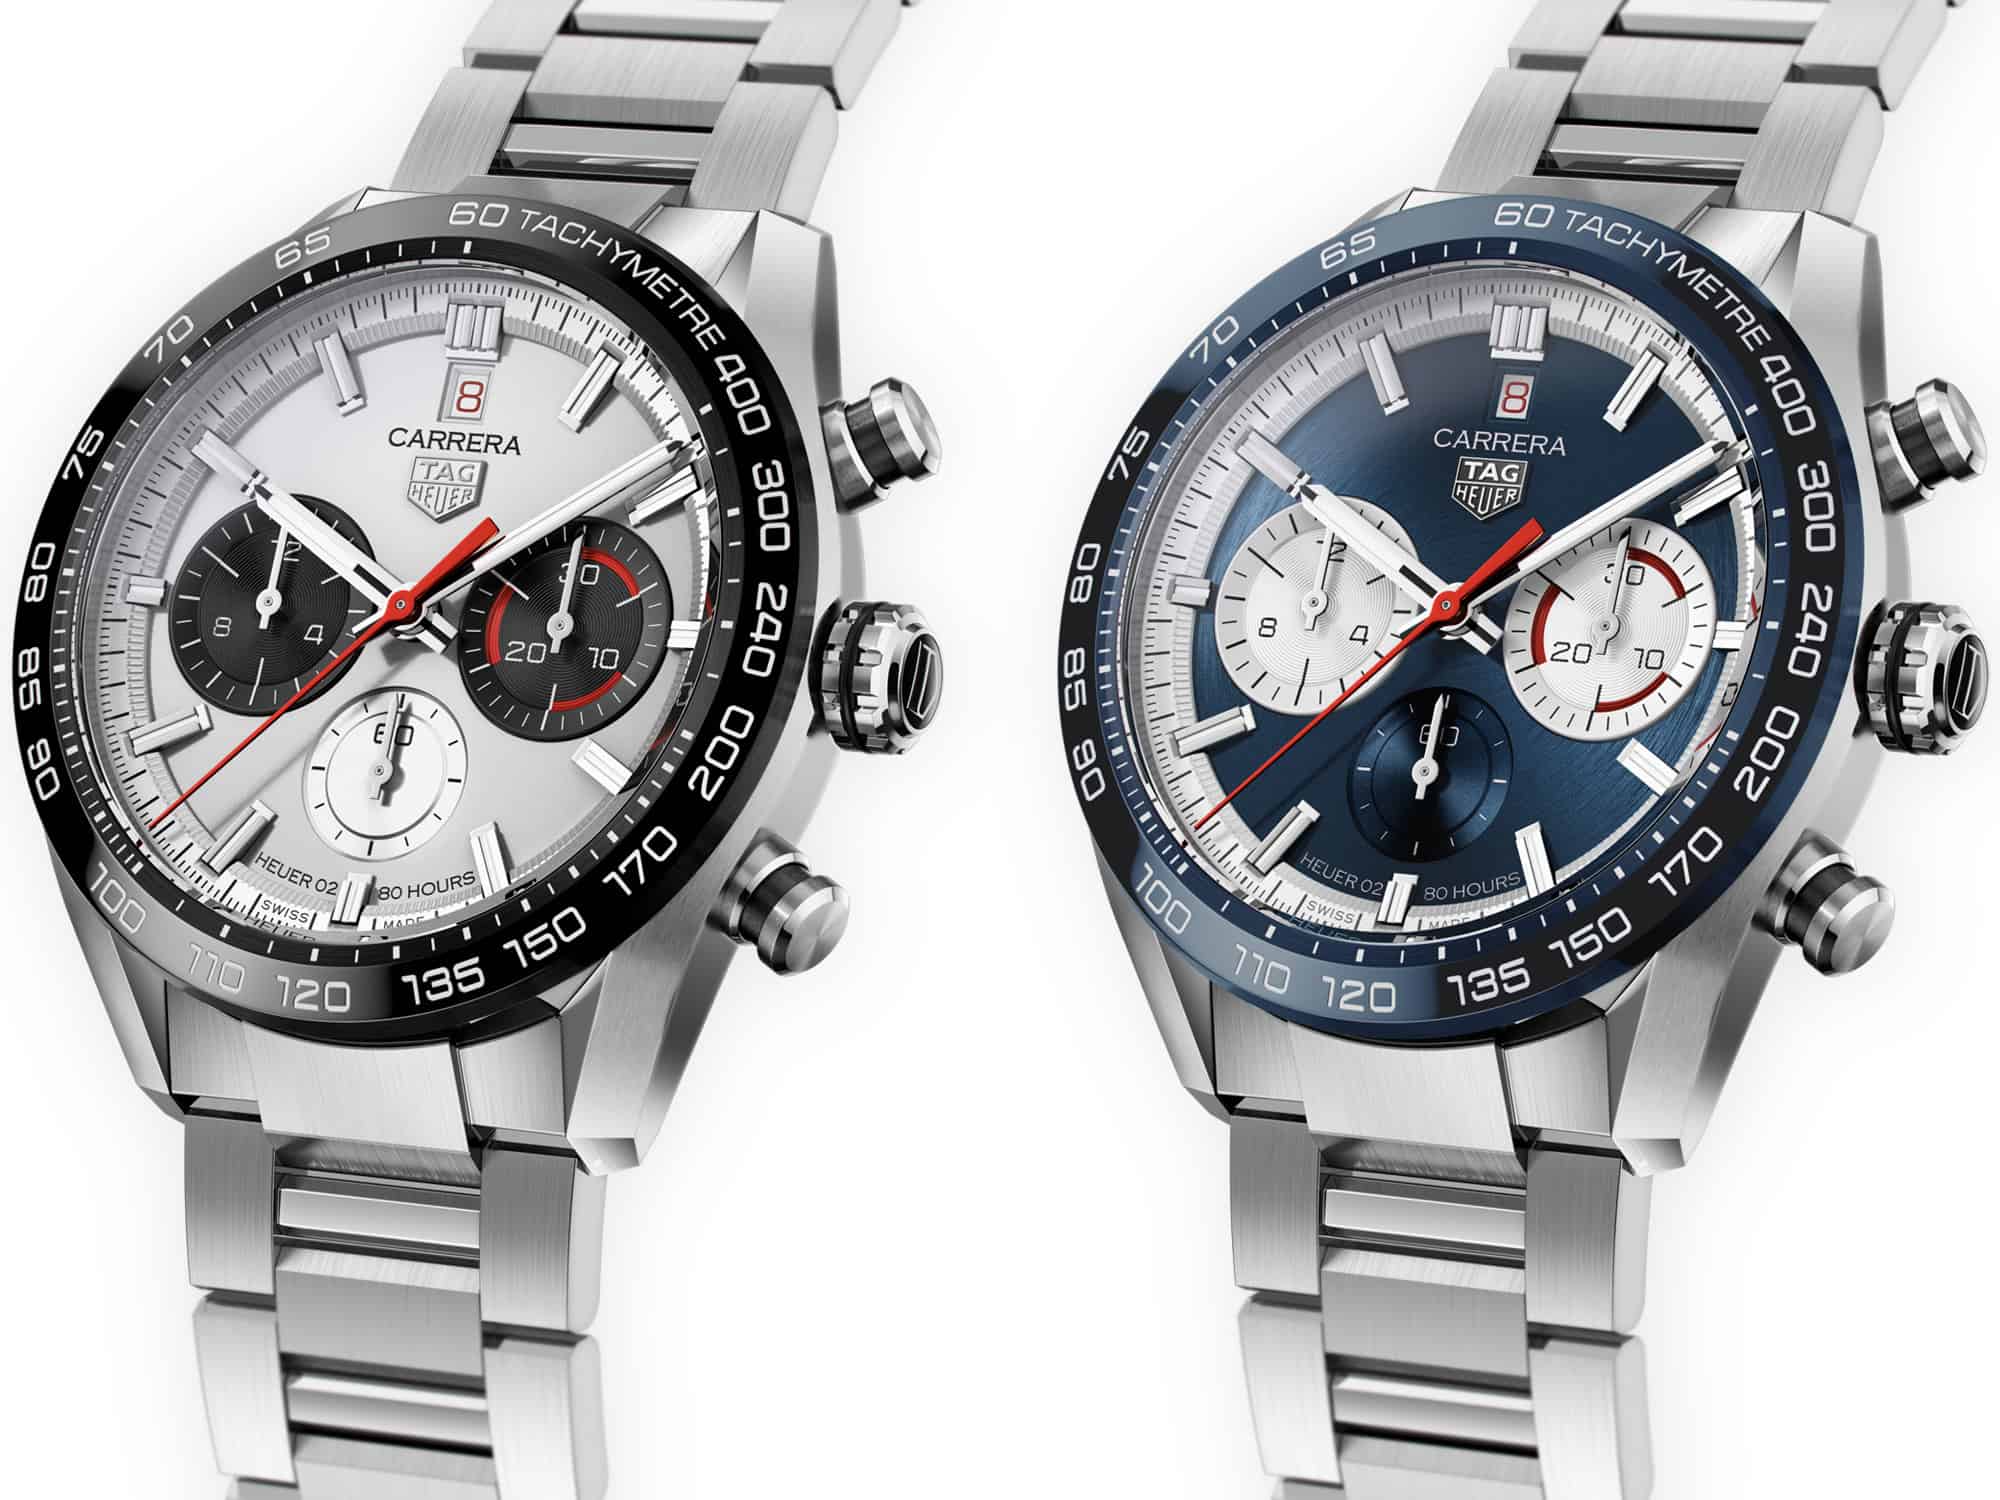 Introducing The TAG Heuer Carrera Sport Chronograph 160 Years Special Edition